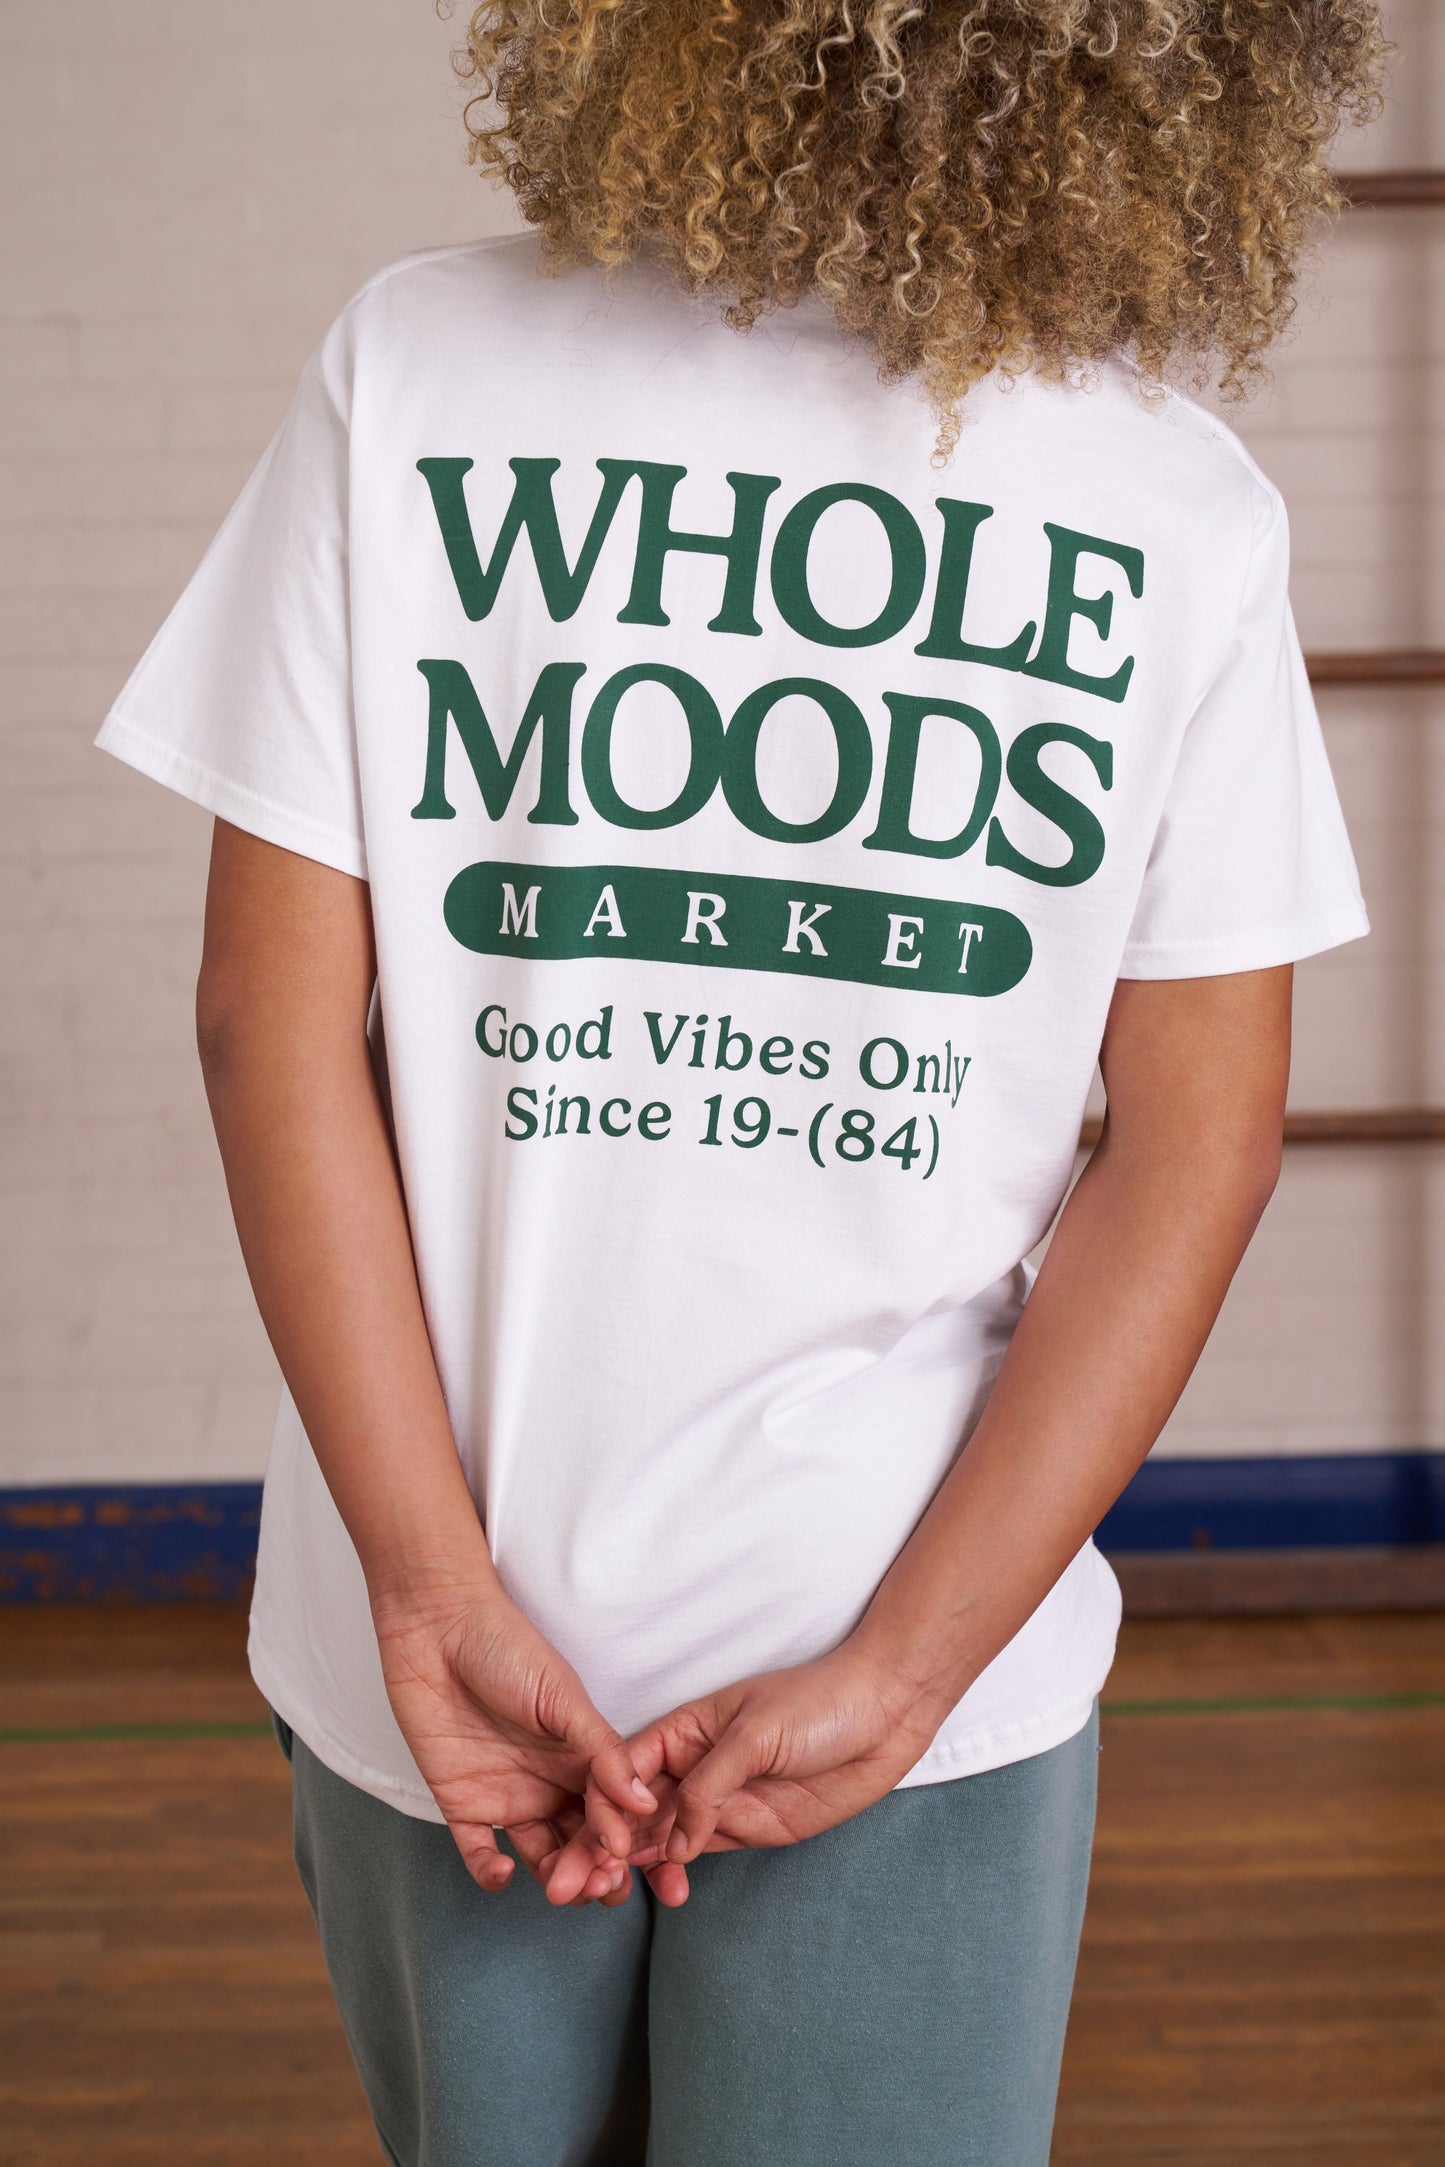 Vice 84 *10 Years Of* 'Whole Moods' Tee - White